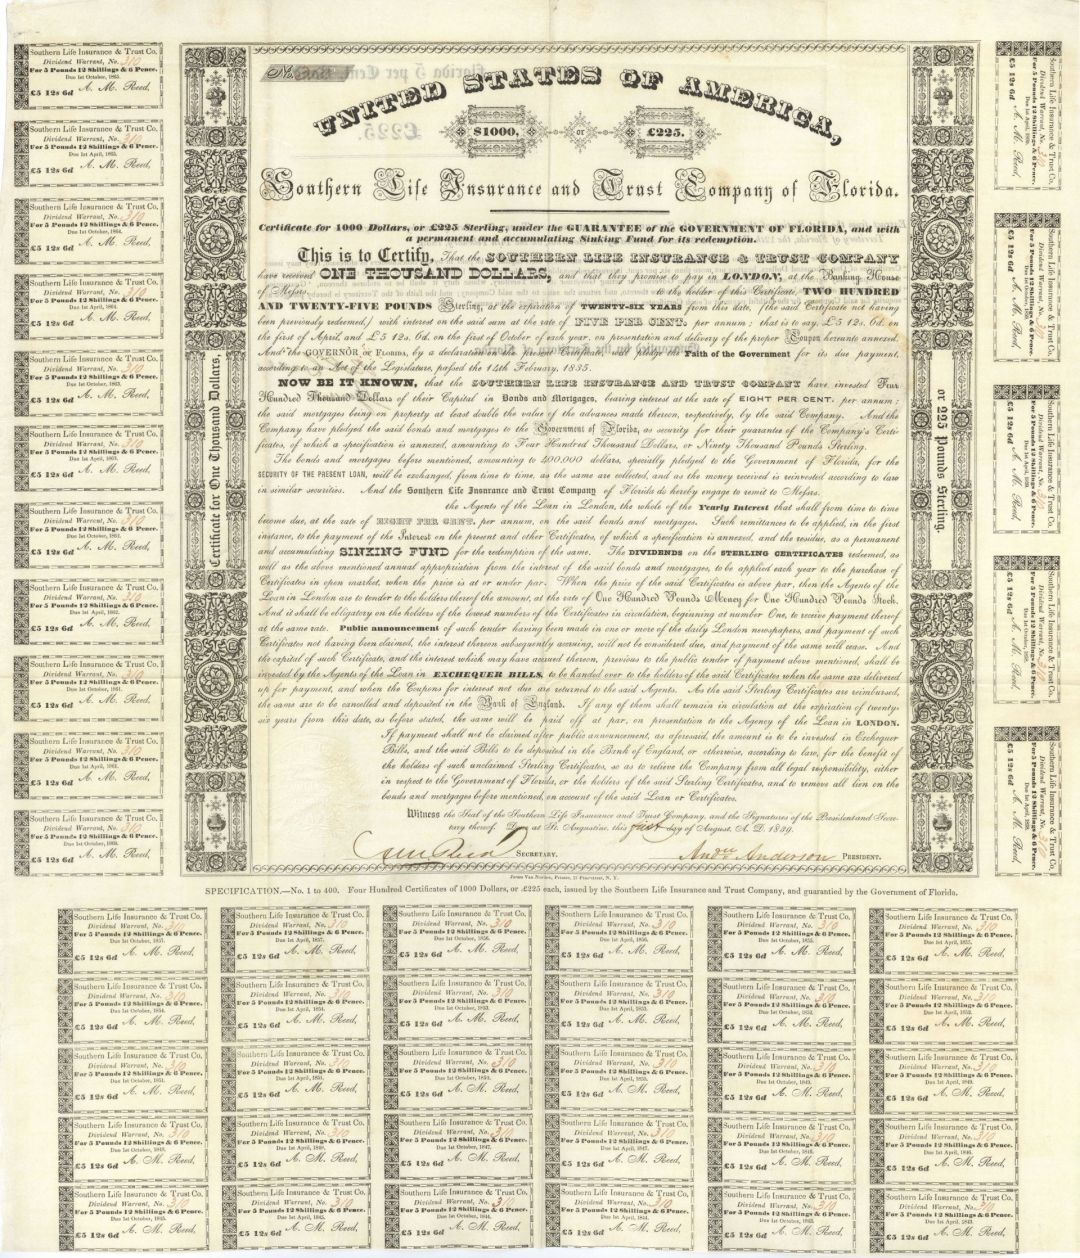 Southern Life Insurance and Trust Co. of Florida - 1839 dated $1,000 or 225 Poun